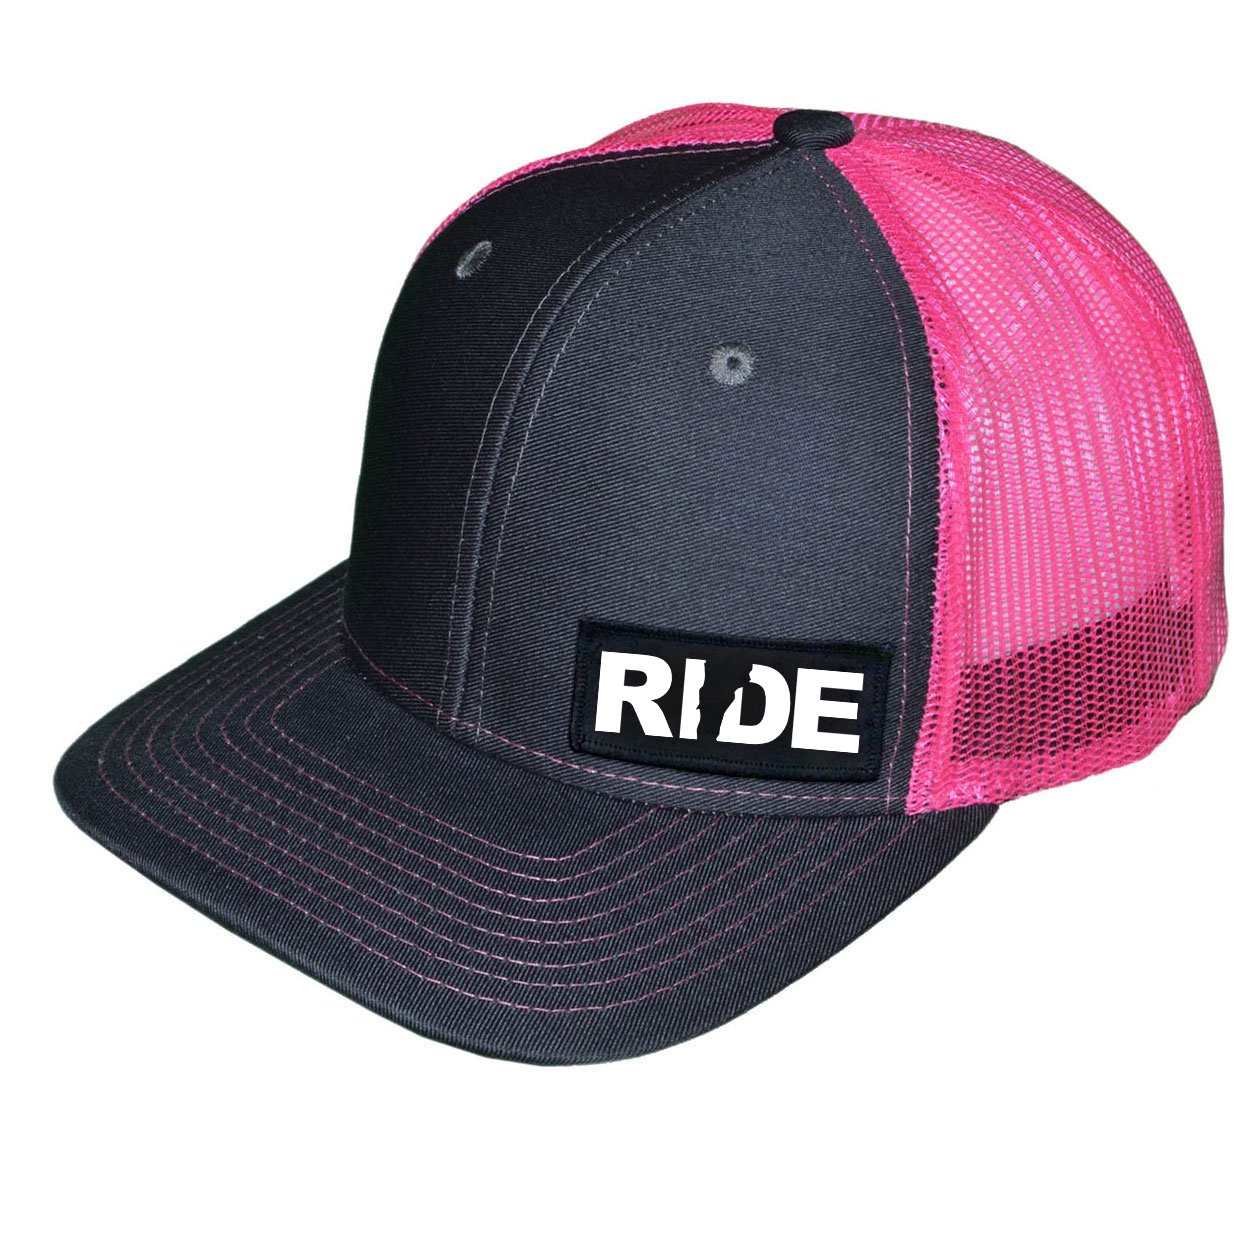 Ride Vermont Night Out Woven Patch Snapback Trucker Hat Charcoal/Neon Pink (White Logo)